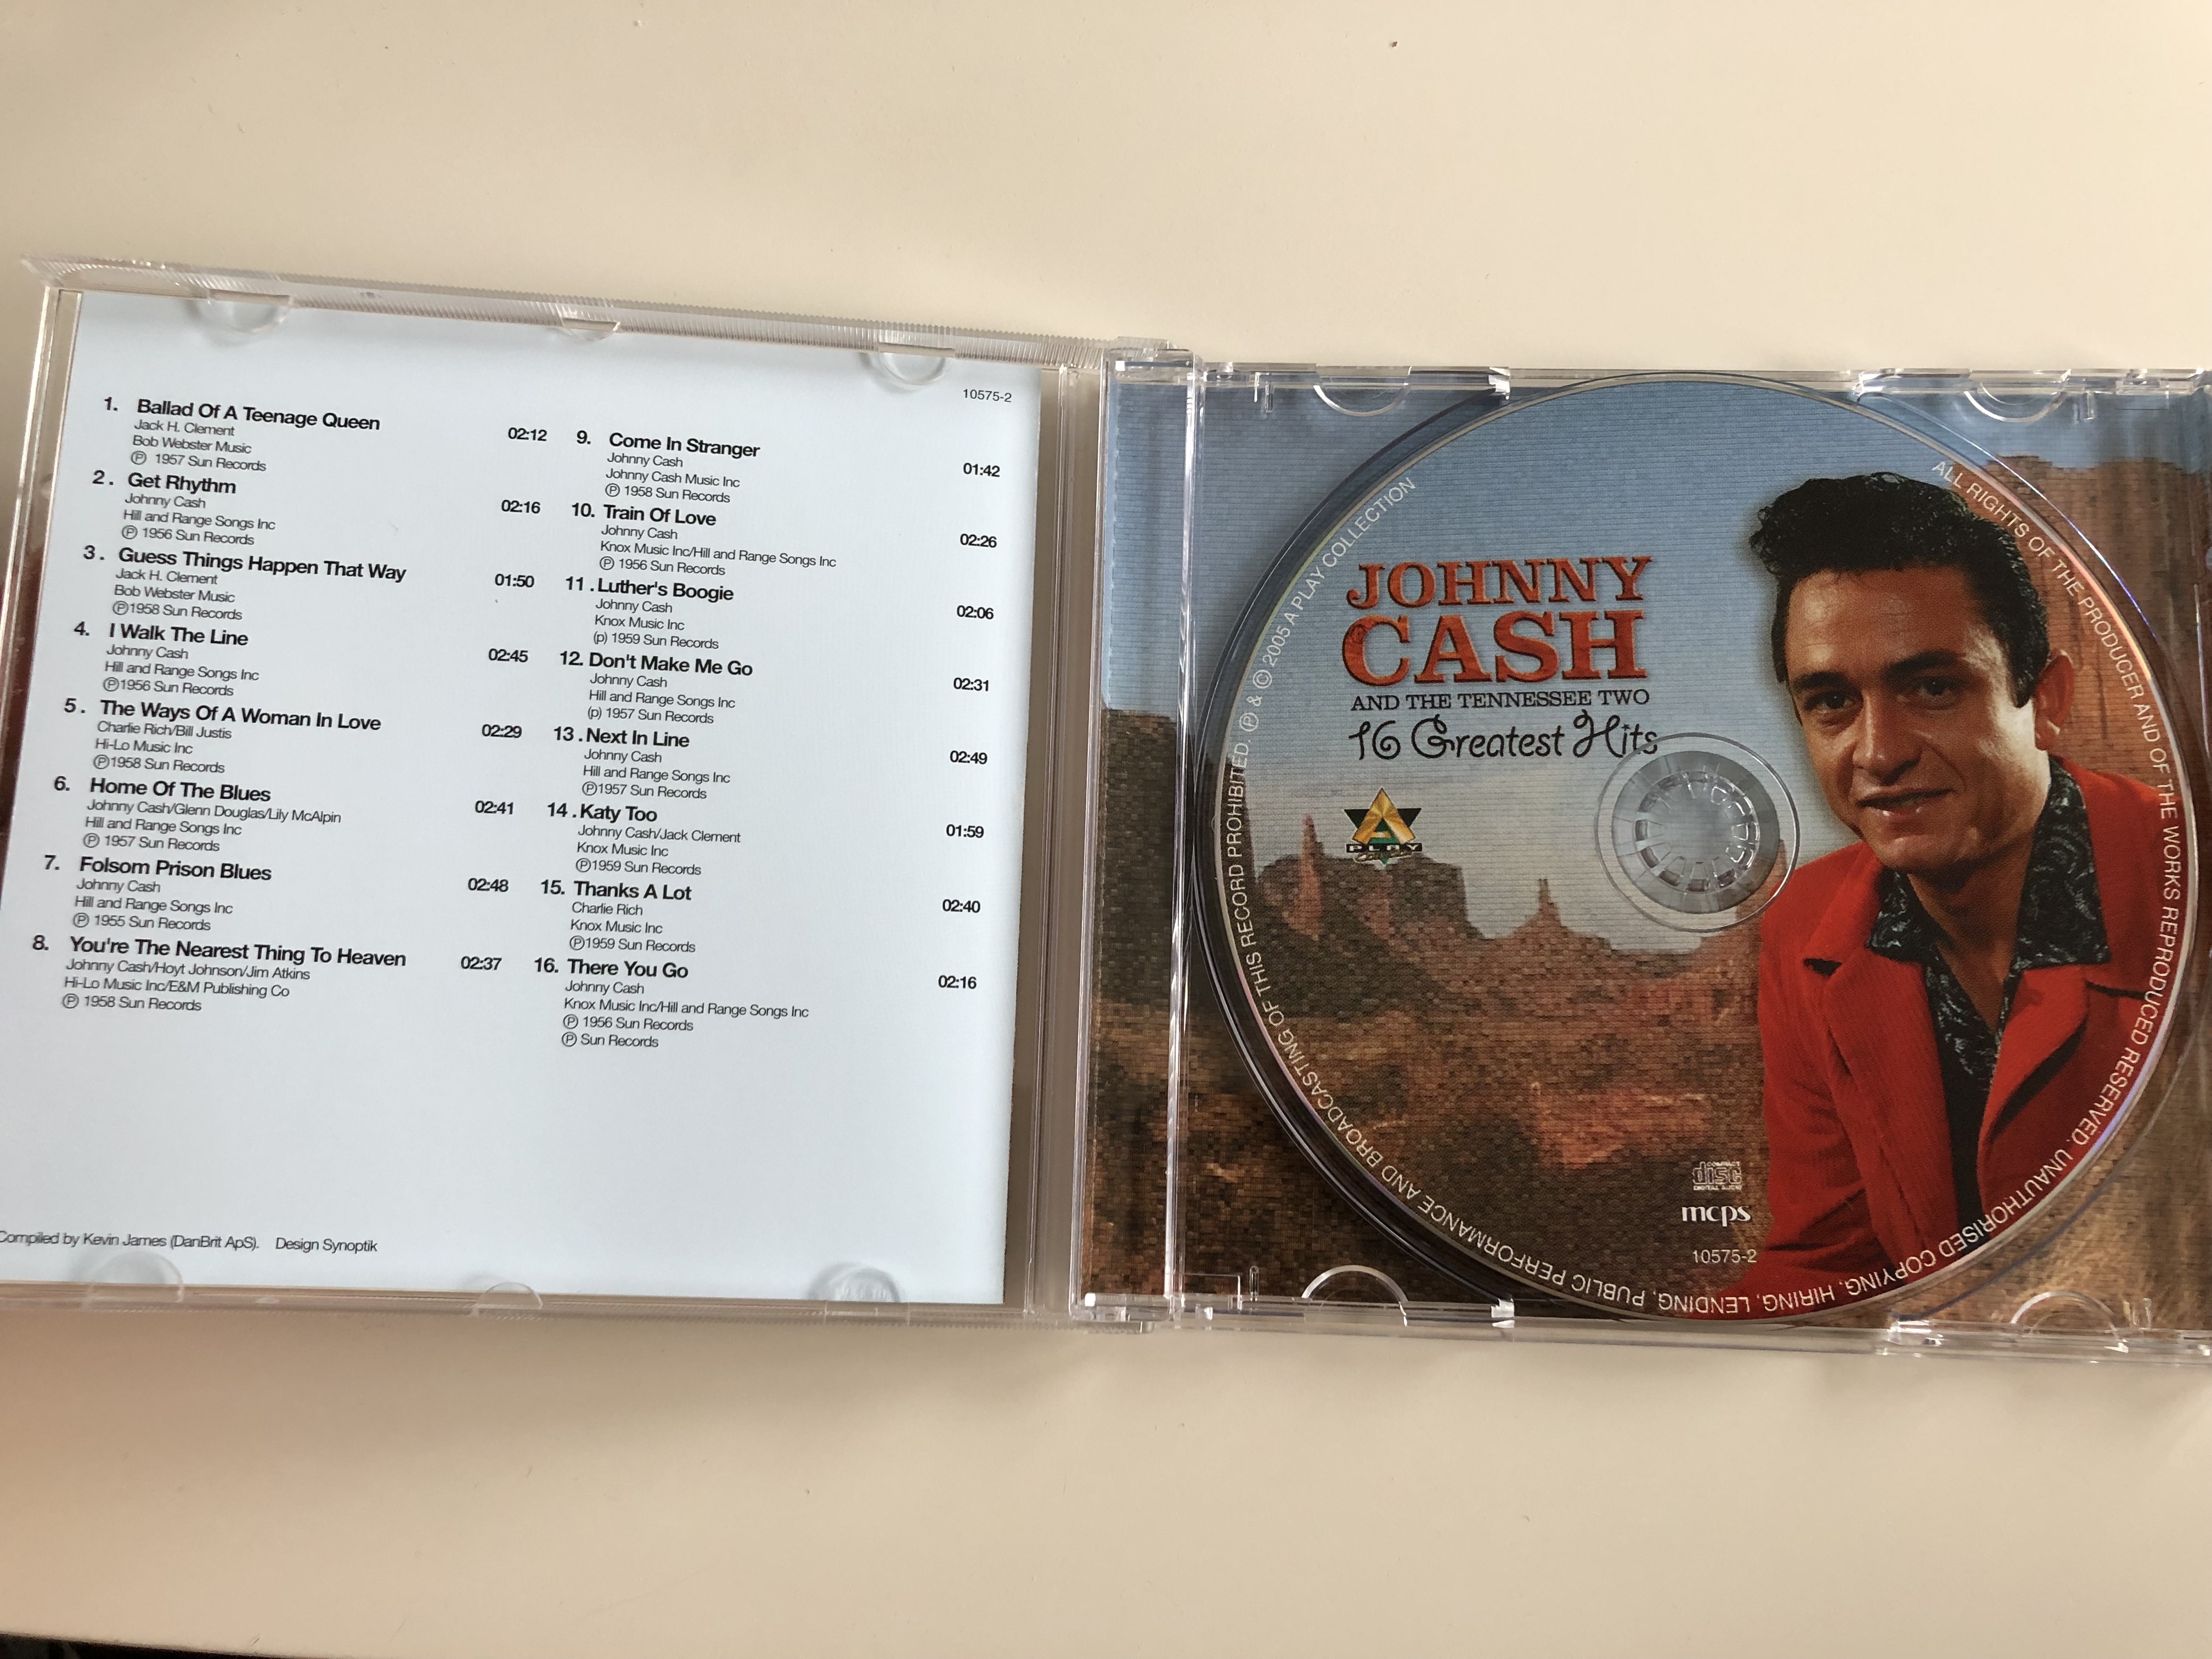 johnny-cash-and-the-tennessee-two-16-greatest-hits-ballad-of-a-teenage-queen-i-walk-the-line-folsom-prison-blues-luther-s-boogie-audio-cd-2005-10575-2-3-.jpg